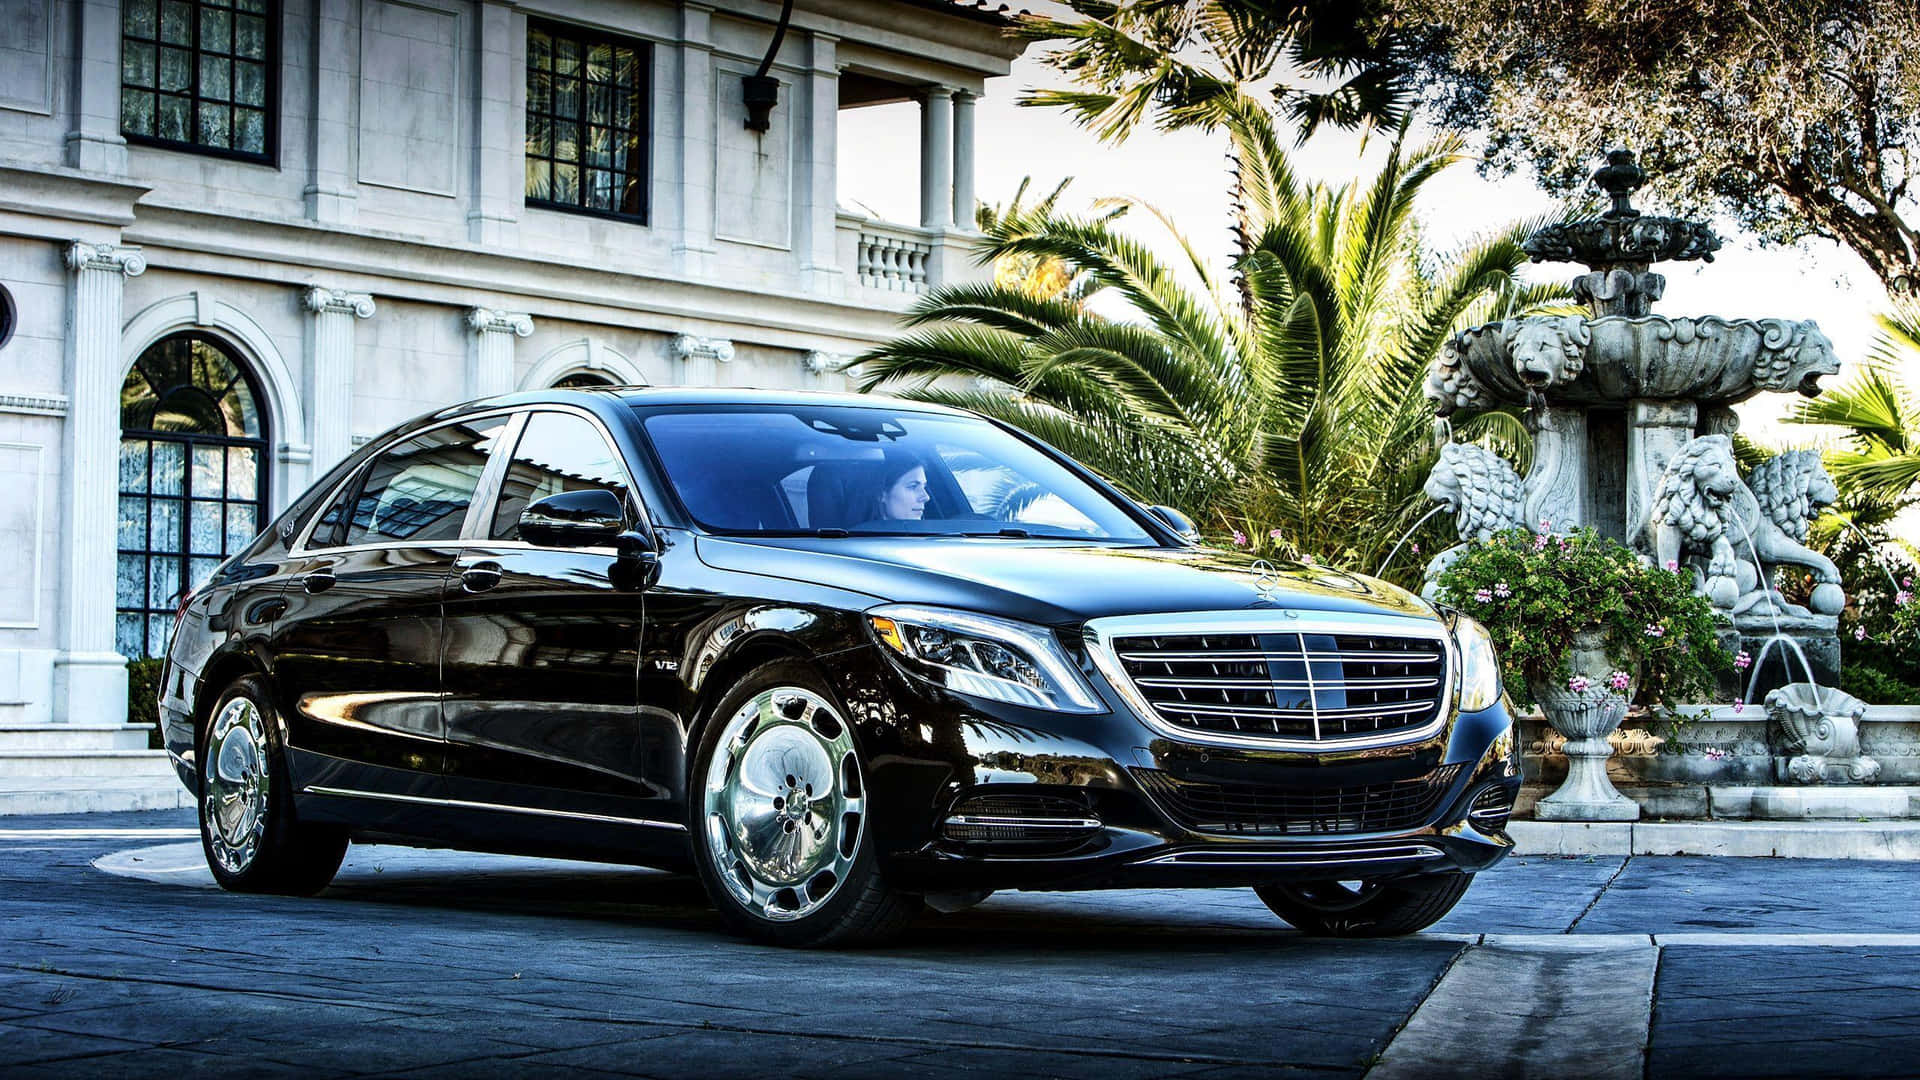 Luxurious Maybach Vehicle Parked by the Shore Wallpaper